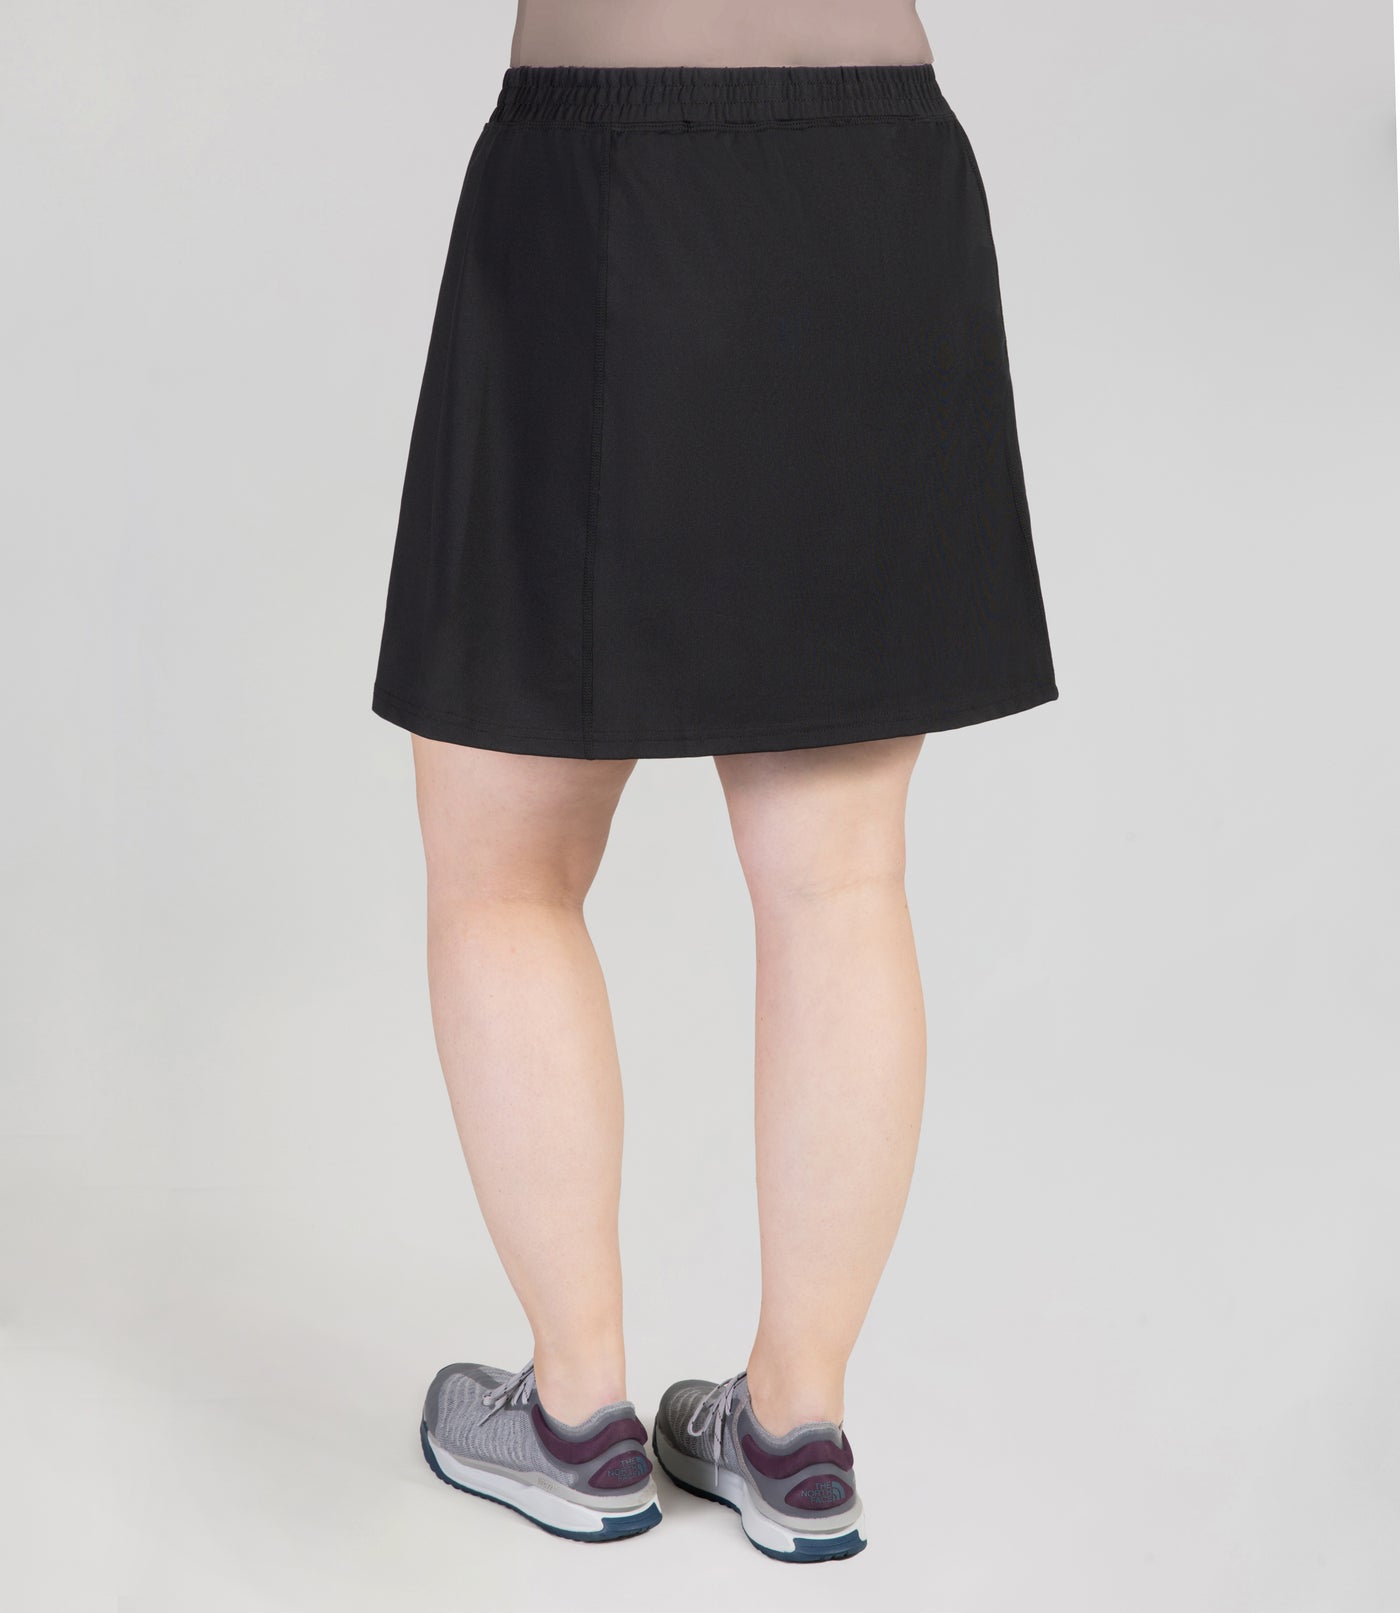 Bottom half of plus sized woman, back view, wearing JunoActives Quikwik lite skirted short in color black. Skirt hem is a few inches above knee.